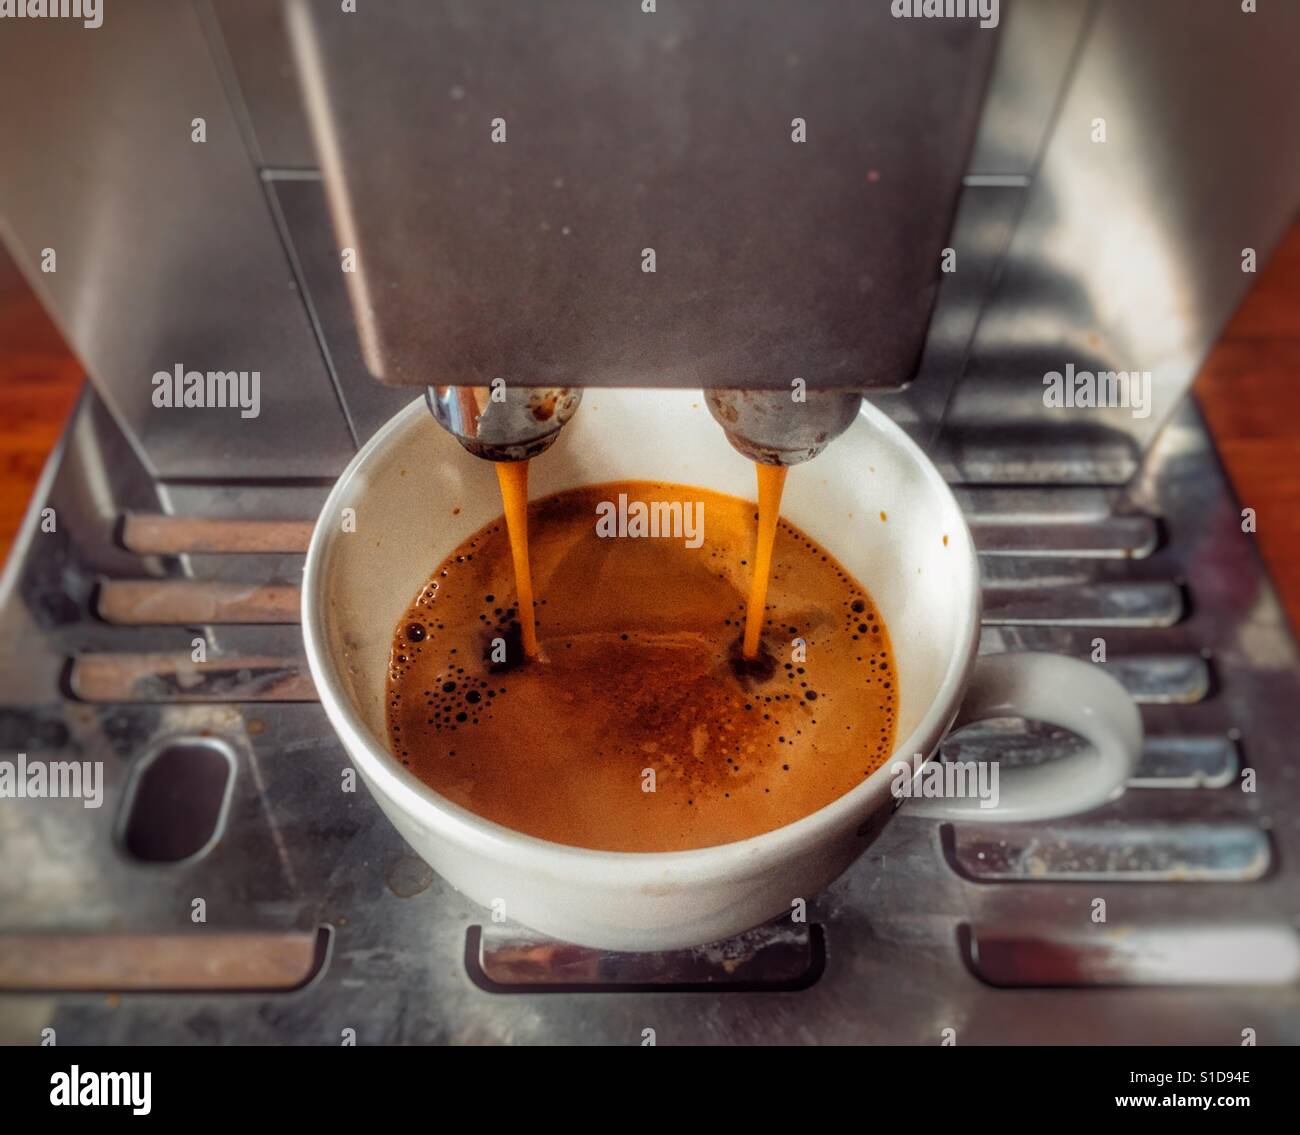 Delonghi capsule coffee machine hi-res stock photography and images - Alamy